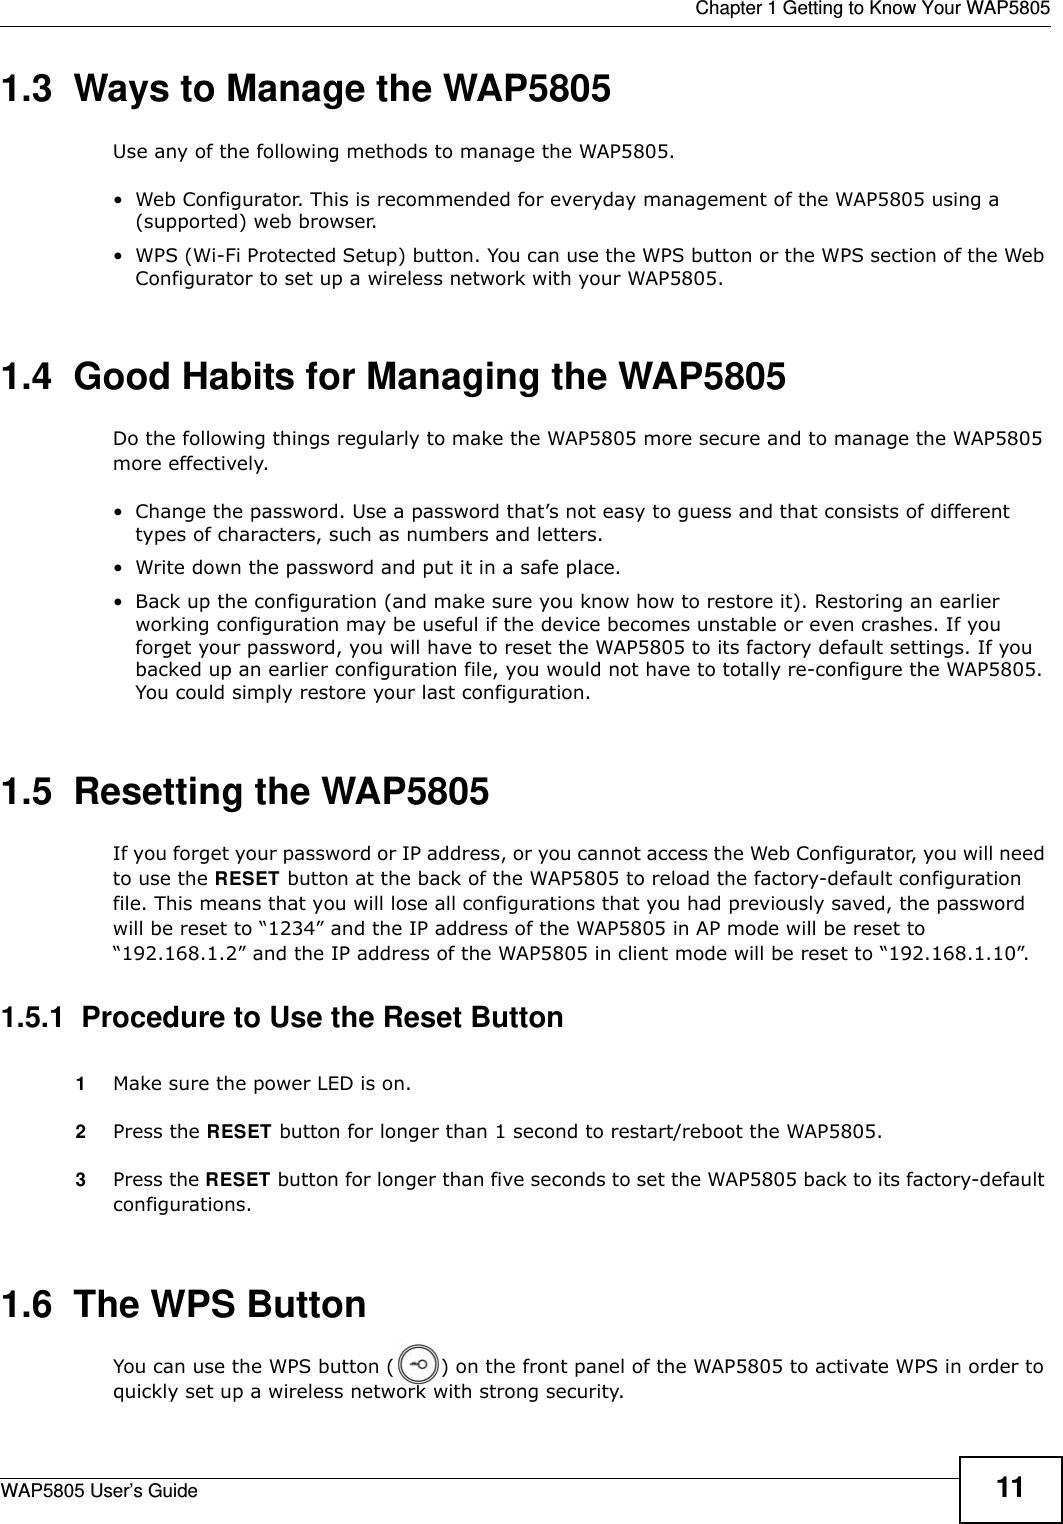  Chapter 1 Getting to Know Your WAP5805WAP5805 User’s Guide 111.3  Ways to Manage the WAP5805Use any of the following methods to manage the WAP5805.• Web Configurator. This is recommended for everyday management of the WAP5805 using a (supported) web browser.• WPS (Wi-Fi Protected Setup) button. You can use the WPS button or the WPS section of the Web Configurator to set up a wireless network with your WAP5805.1.4  Good Habits for Managing the WAP5805Do the following things regularly to make the WAP5805 more secure and to manage the WAP5805 more effectively.• Change the password. Use a password that’s not easy to guess and that consists of different types of characters, such as numbers and letters.• Write down the password and put it in a safe place.• Back up the configuration (and make sure you know how to restore it). Restoring an earlier working configuration may be useful if the device becomes unstable or even crashes. If you forget your password, you will have to reset the WAP5805 to its factory default settings. If you backed up an earlier configuration file, you would not have to totally re-configure the WAP5805. You could simply restore your last configuration.1.5  Resetting the WAP5805If you forget your password or IP address, or you cannot access the Web Configurator, you will need to use the RESET button at the back of the WAP5805 to reload the factory-default configuration file. This means that you will lose all configurations that you had previously saved, the password will be reset to “1234” and the IP address of the WAP5805 in AP mode will be reset to “192.168.1.2” and the IP address of the WAP5805 in client mode will be reset to “192.168.1.10”.1.5.1  Procedure to Use the Reset Button1Make sure the power LED is on.2Press the RESET button for longer than 1 second to restart/reboot the WAP5805.3Press the RESET button for longer than five seconds to set the WAP5805 back to its factory-default configurations.1.6  The WPS ButtonYou can use the WPS button ( ) on the front panel of the WAP5805 to activate WPS in order to quickly set up a wireless network with strong security.